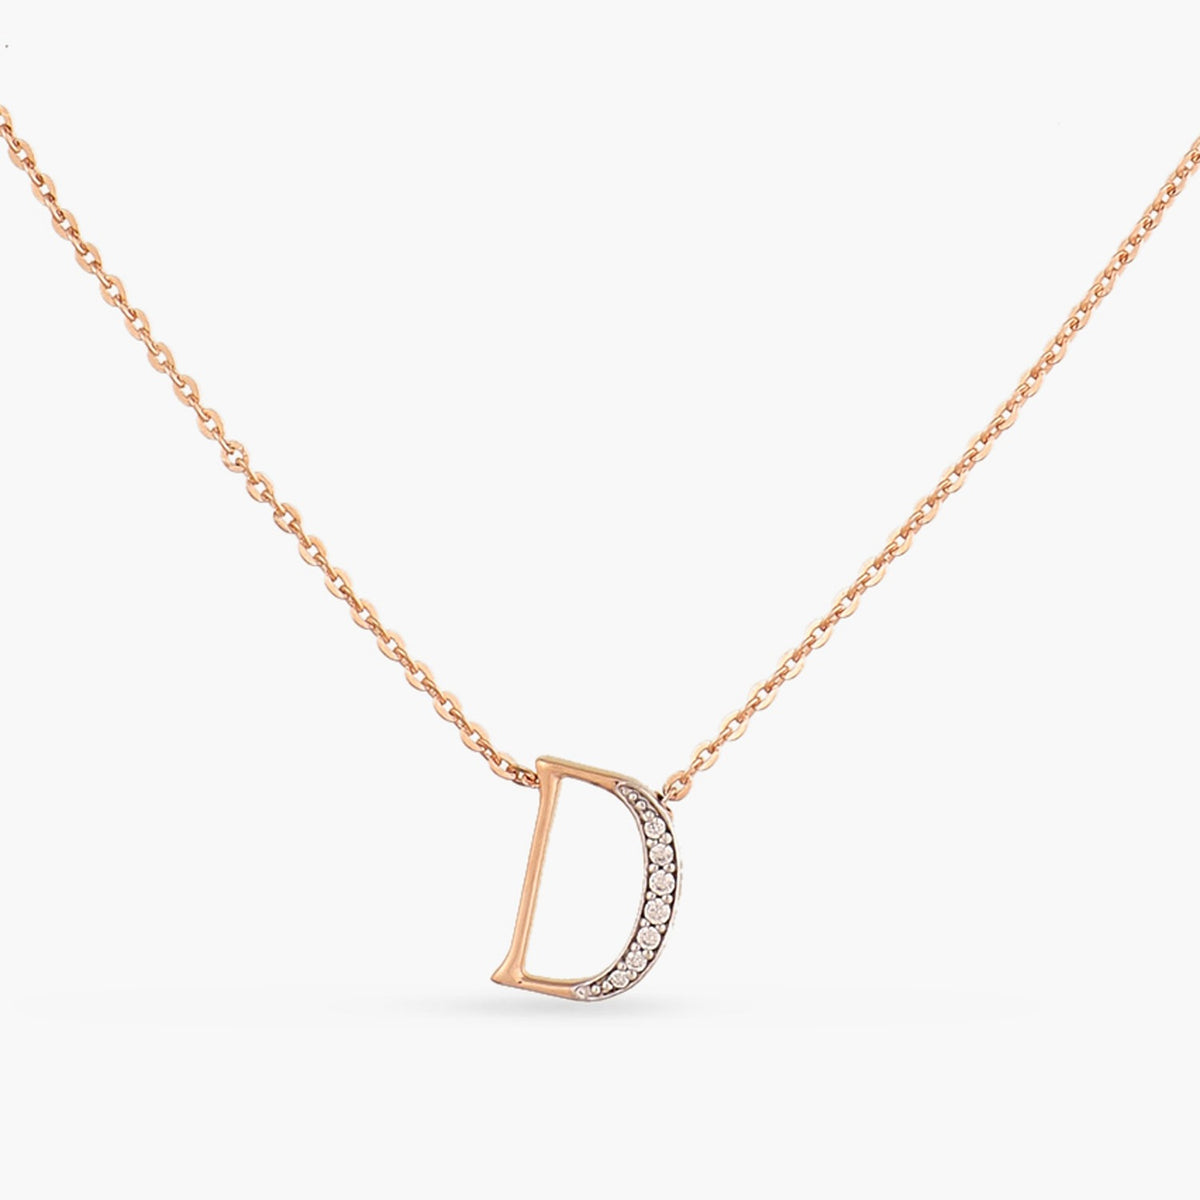 14K Gold Initial Disk Necklace - Acadian Estates & Custom Pendant and Chain  $285.00 Jewelry Type_Necklace